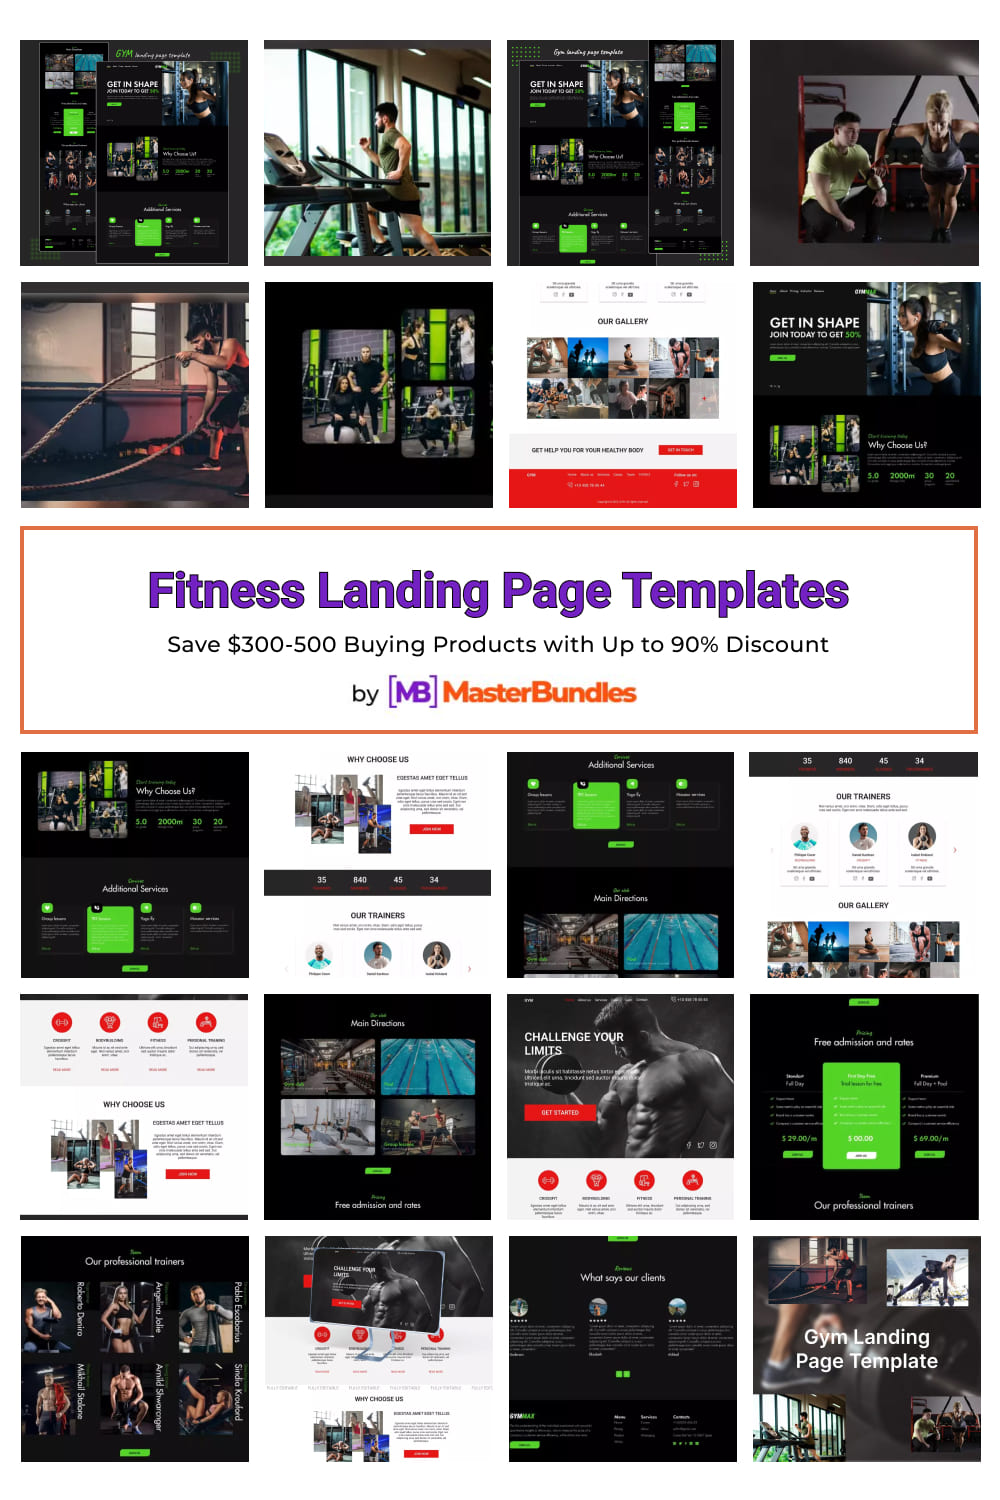 Fitness Landing Page Templates Pinterest image.